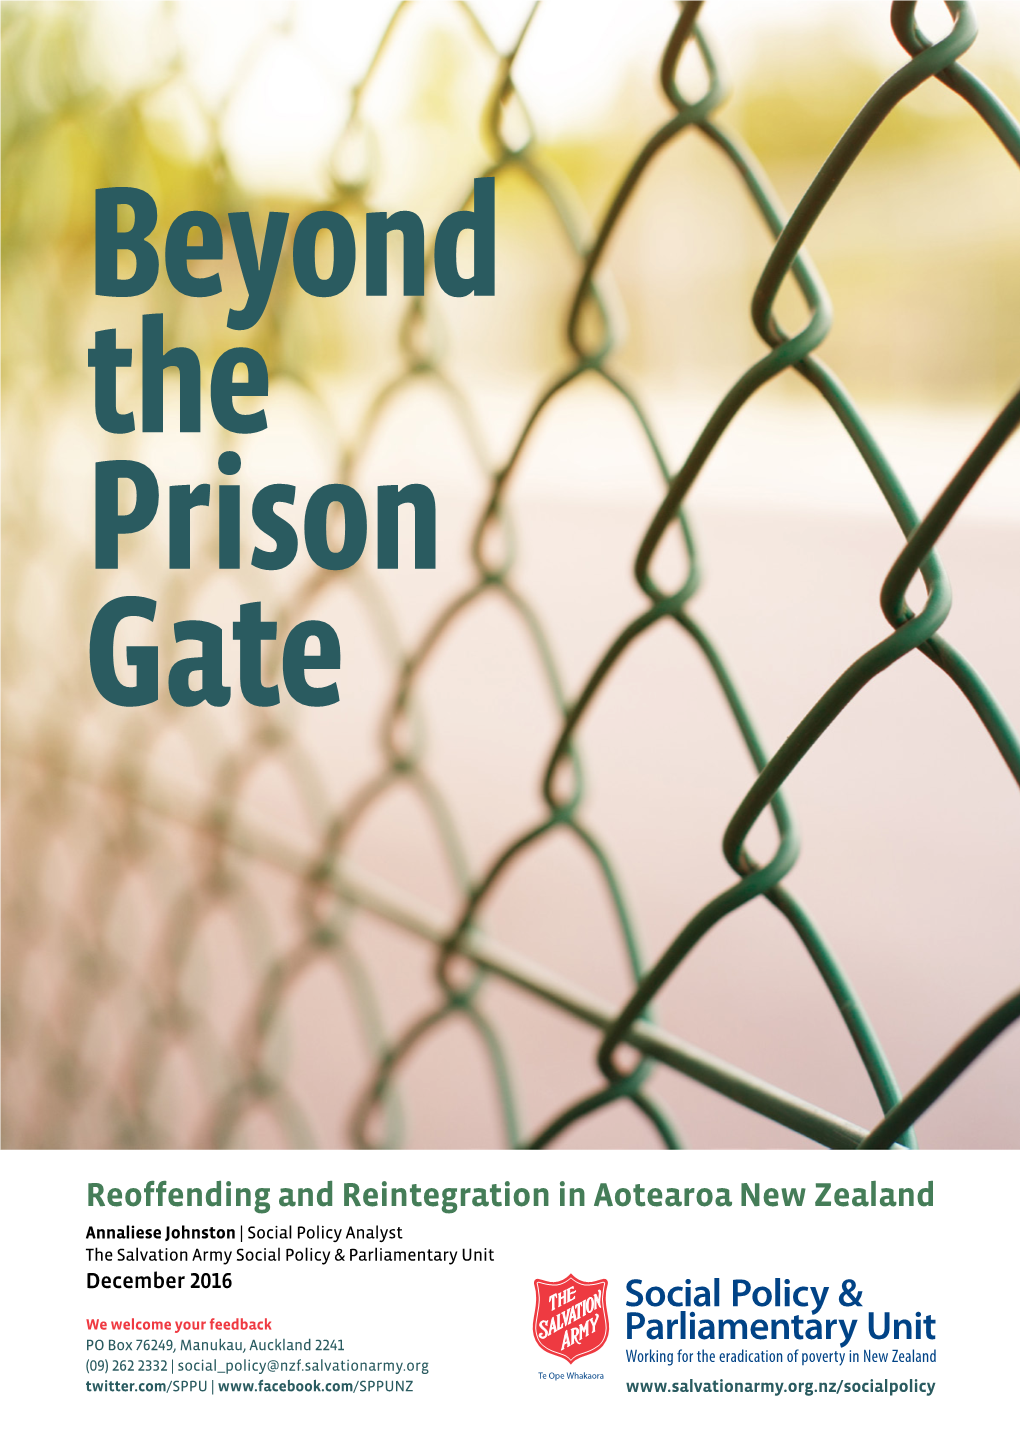 Reoffending and Reintegration in Aotearoa New Zealand Annaliese Johnston | Social Policy Analyst the Salvation Army Social Policy & Parliamentary Unit December 2016